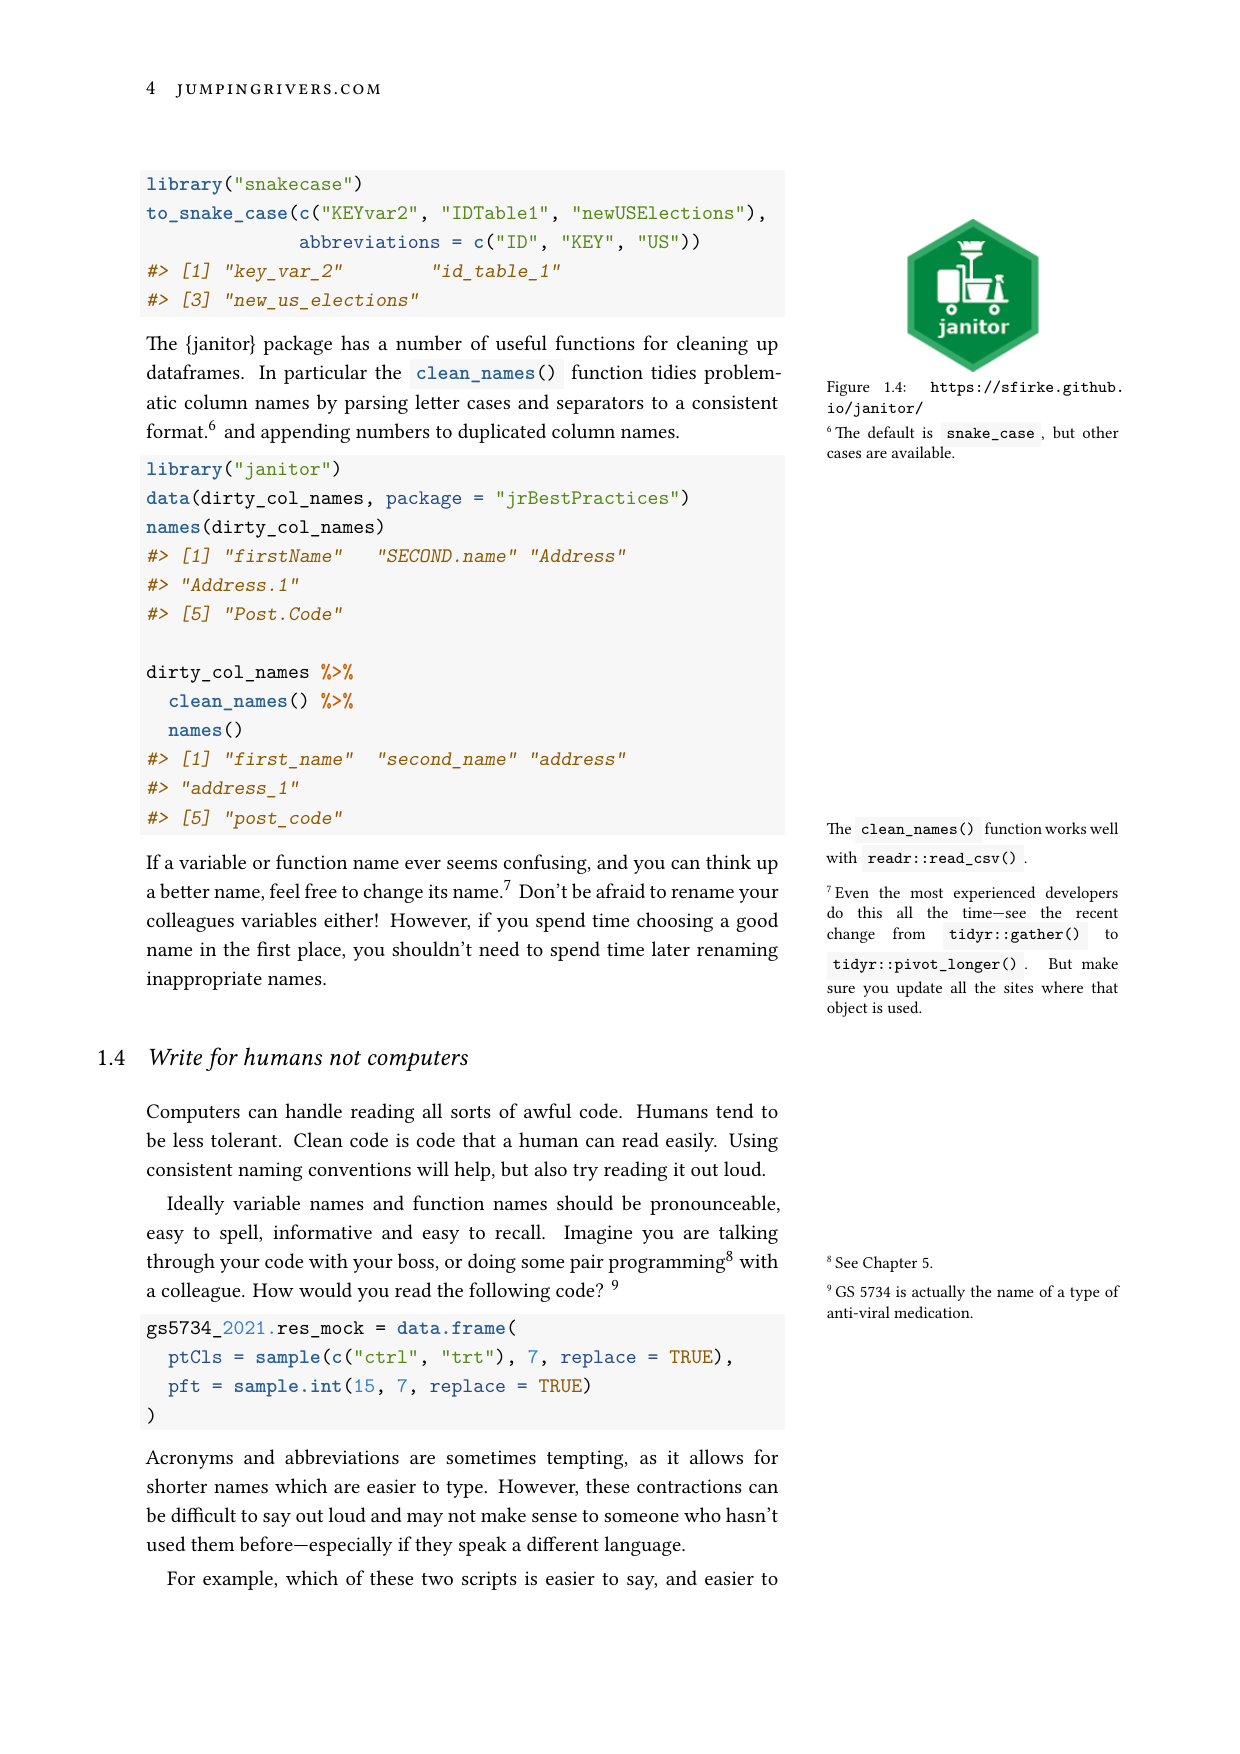 Page 4 of example course material for  R Best Practices